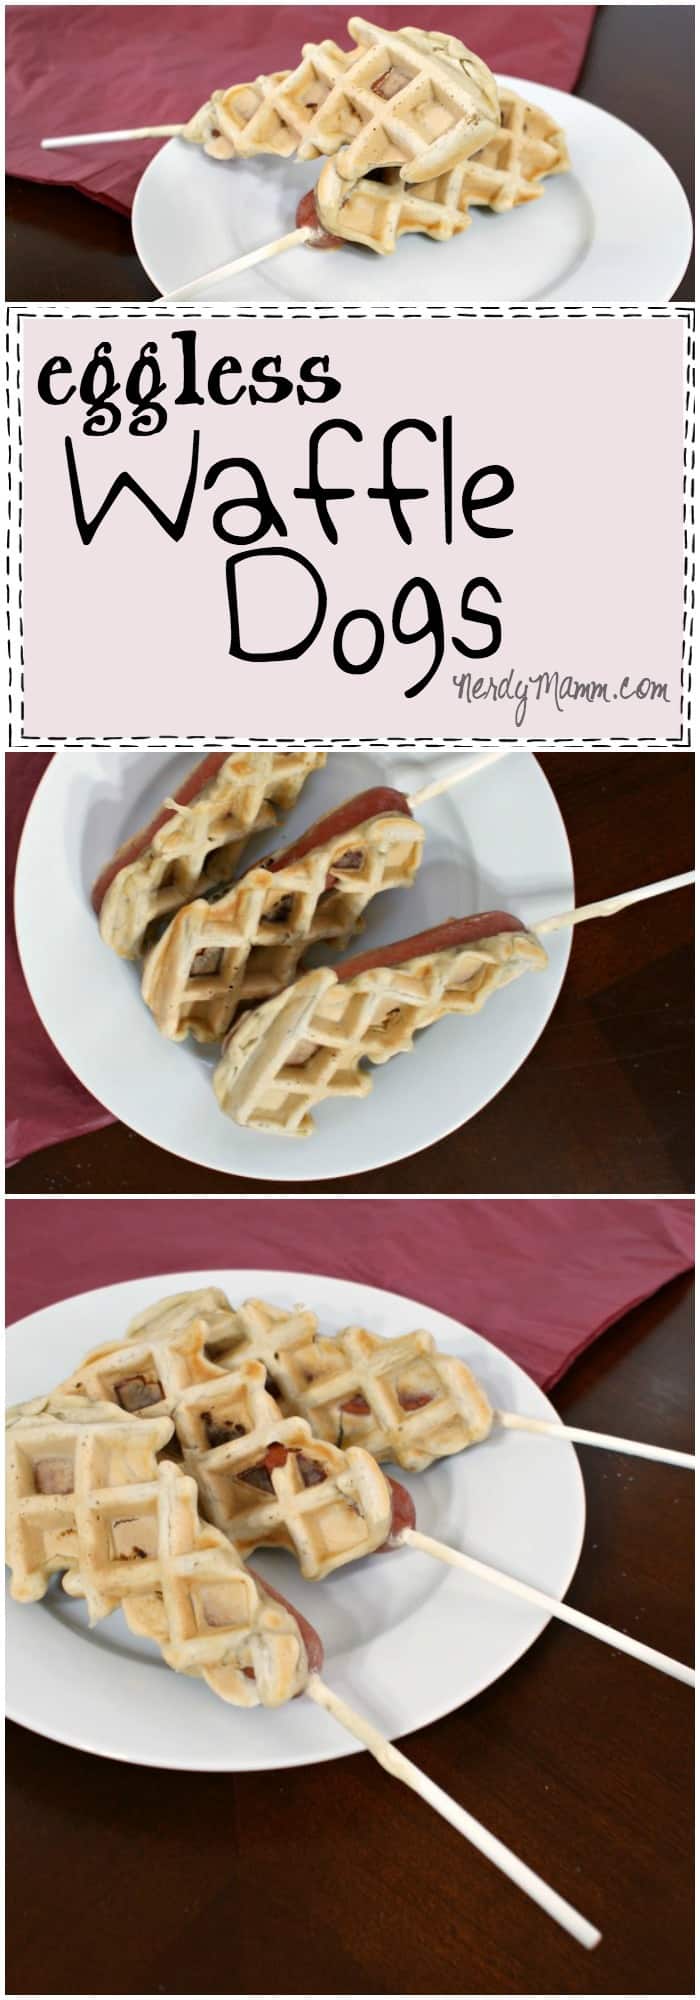 Oh, I just LOVE this eggless, dairy-free, sugar-free Waffle Dog recipe. It's like a corn dog, but NOT. Love this so much. And so do my kids.